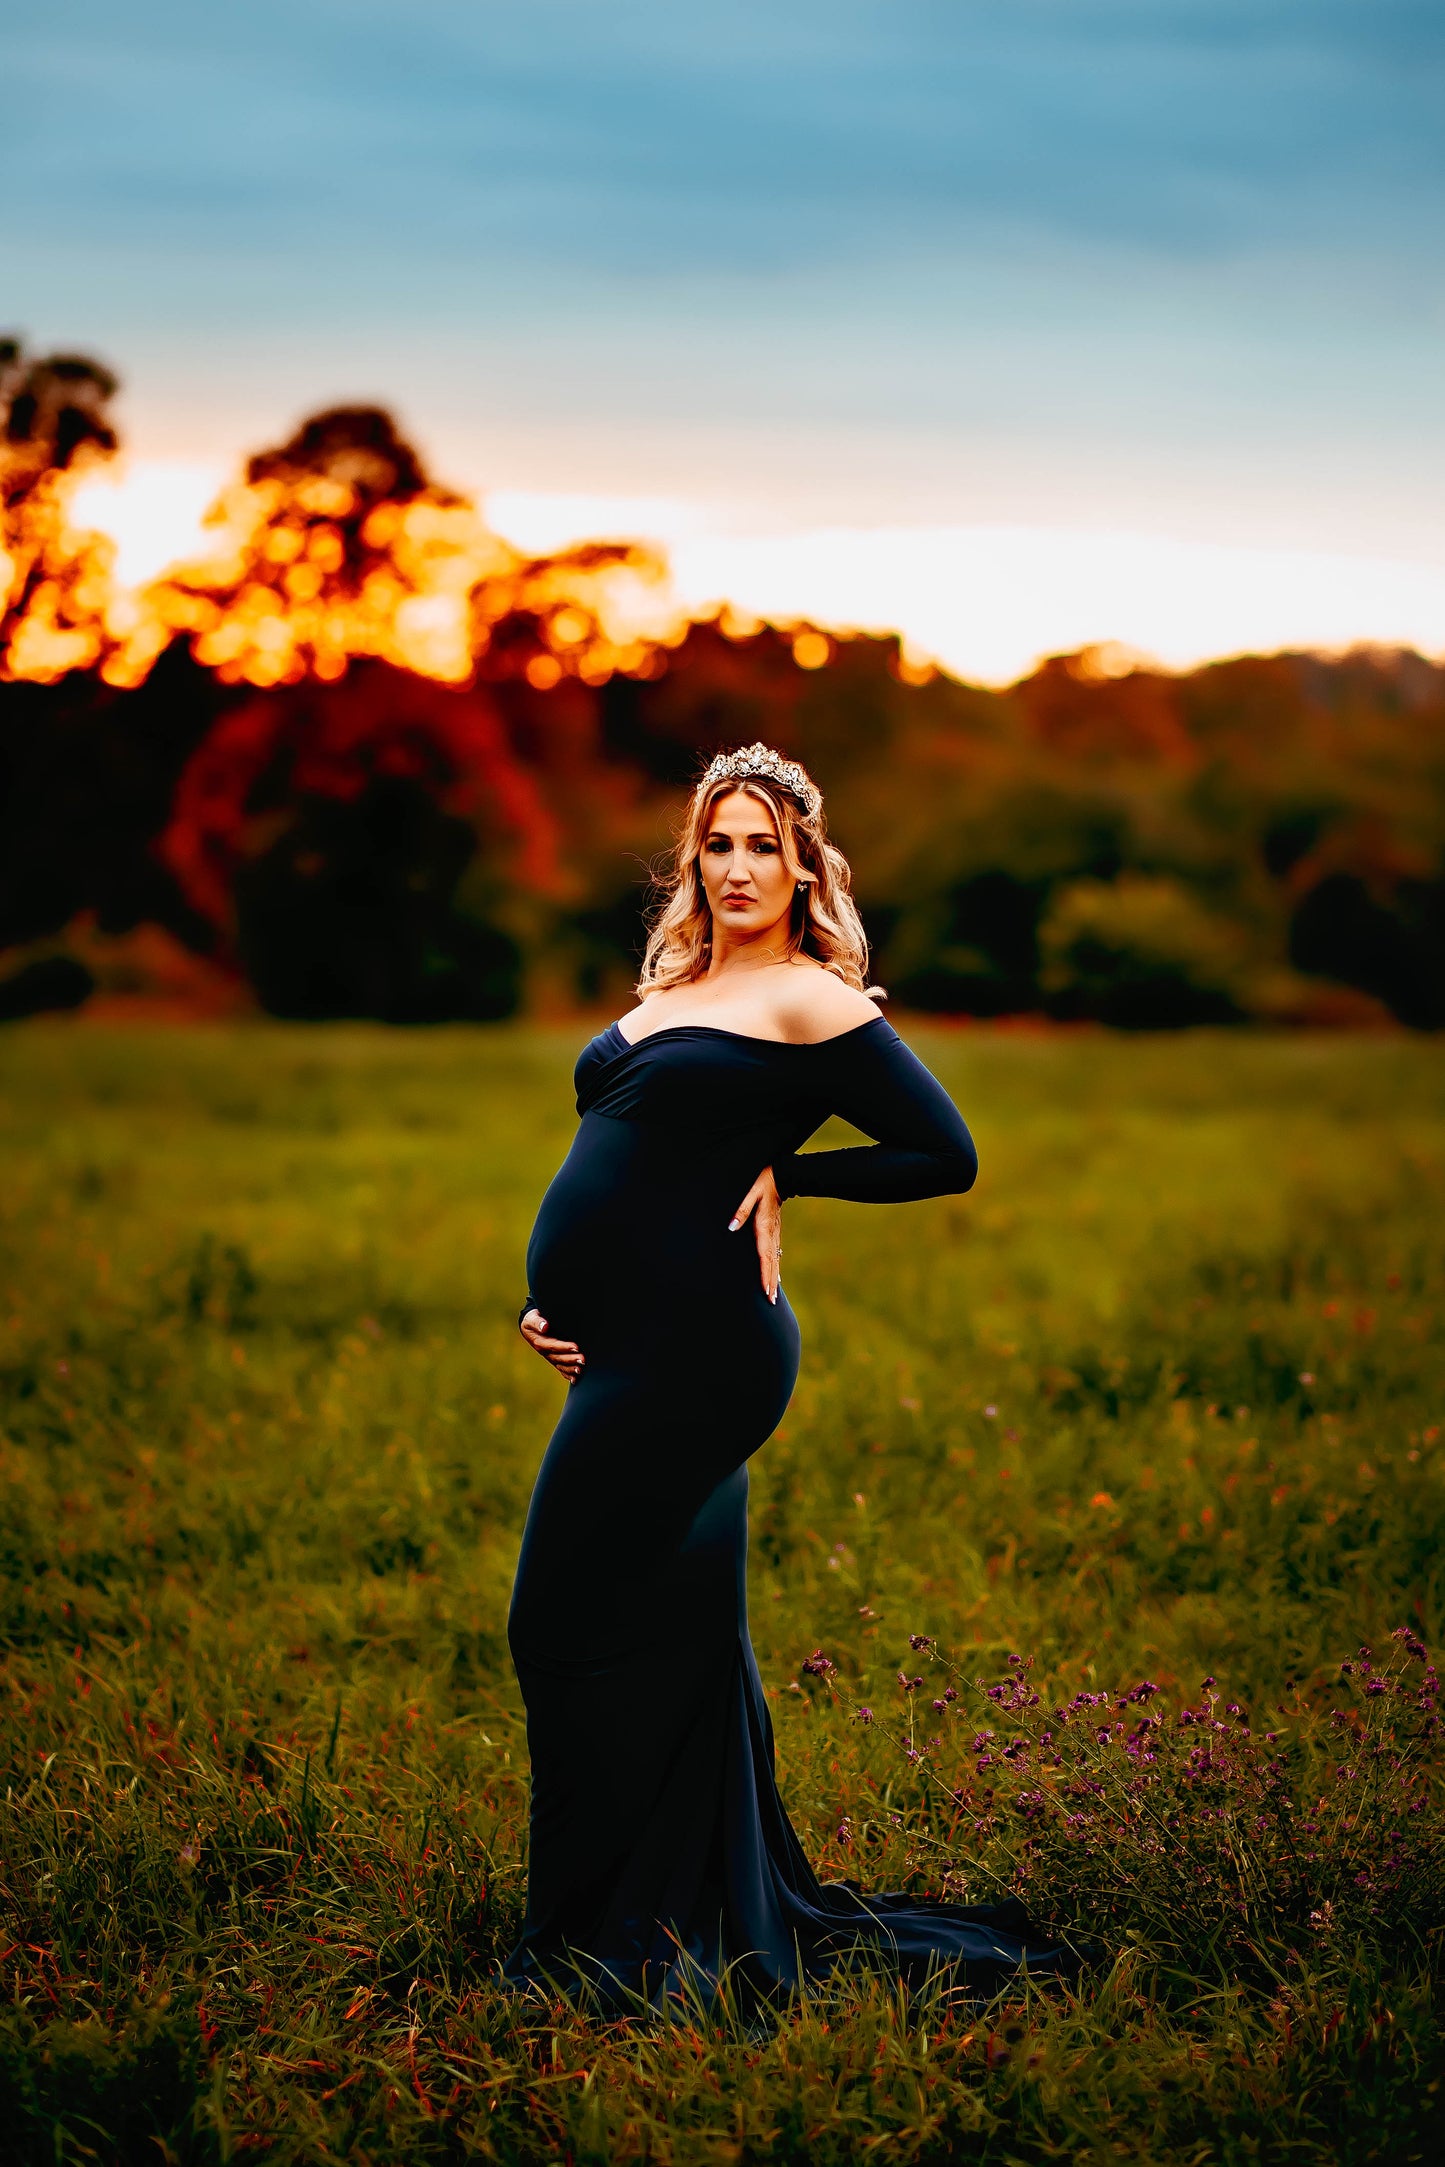 Navy Blue Fitted Gown - maternity photoshoot dress